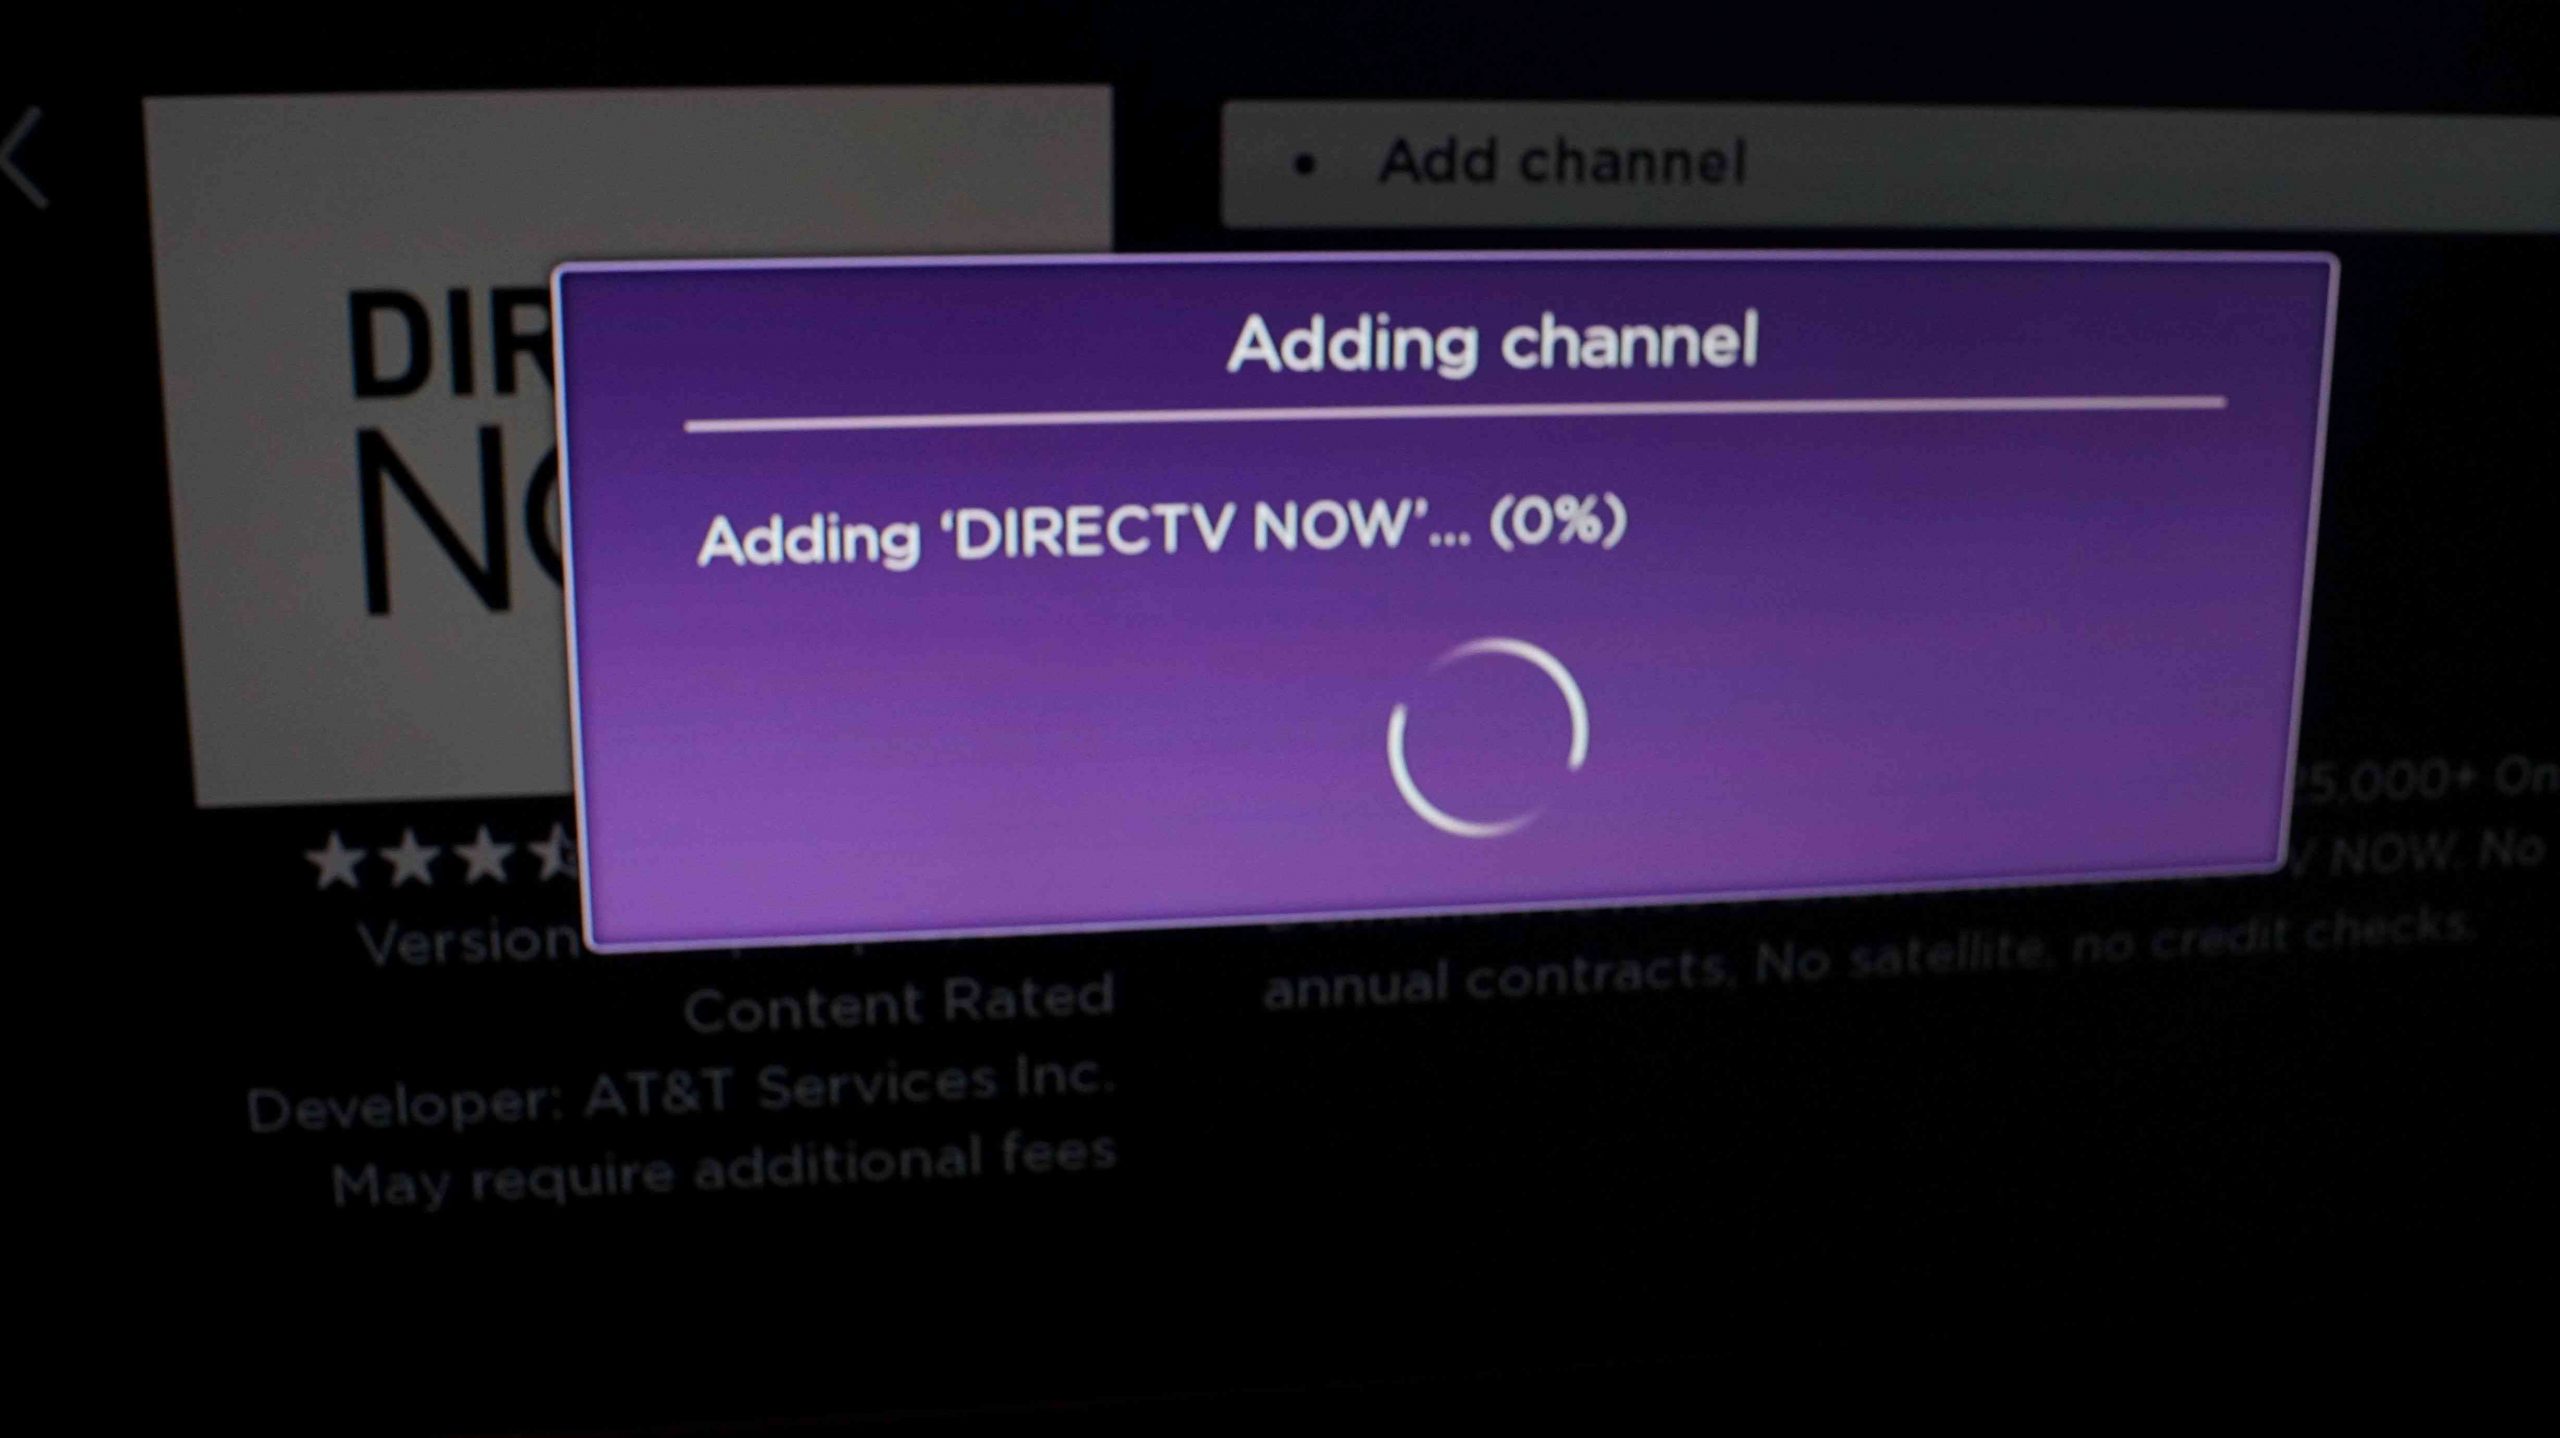 Free Month of DirecTV NOW for Roku